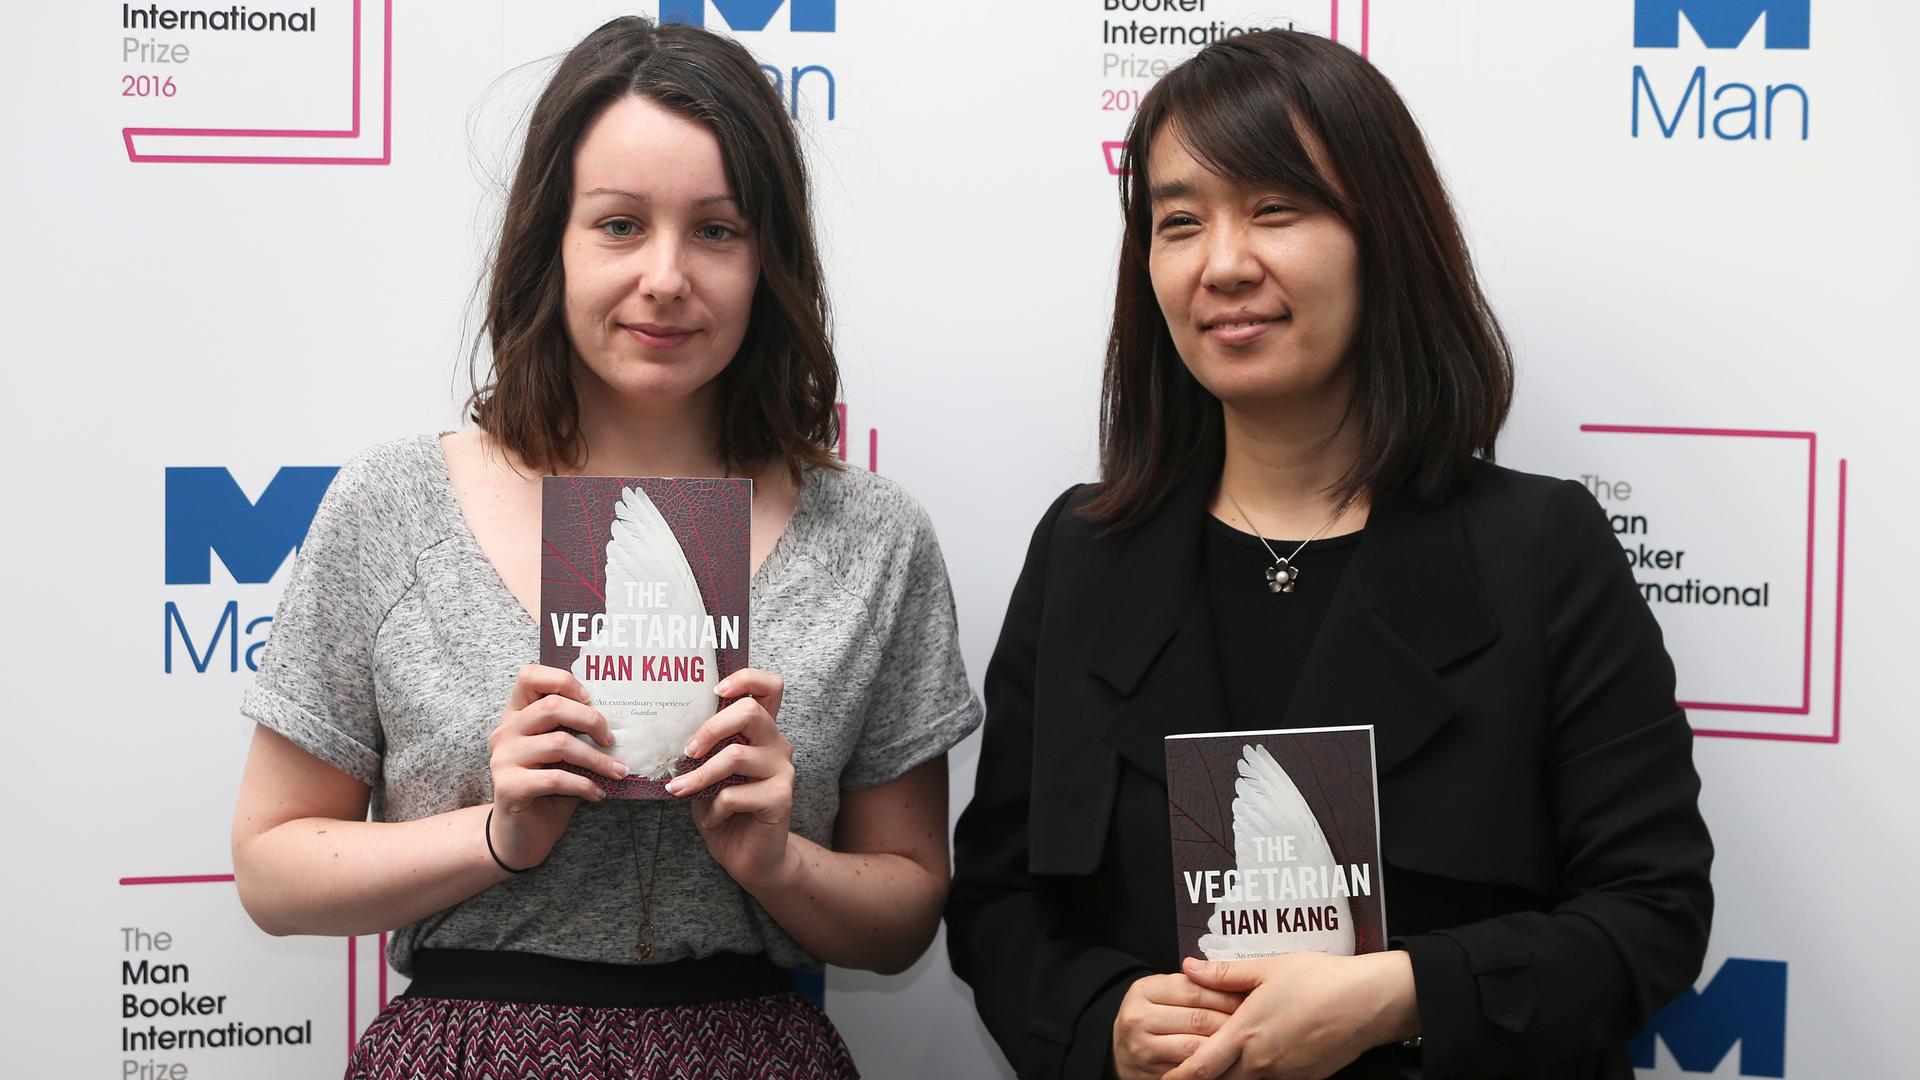 Nominated translator Deborah Smith (L) and author Han Kang pose with their novel "The Vegetarian", during a media event for the Man Booker International Prize 2016, in London, Britain May 15, 2016.